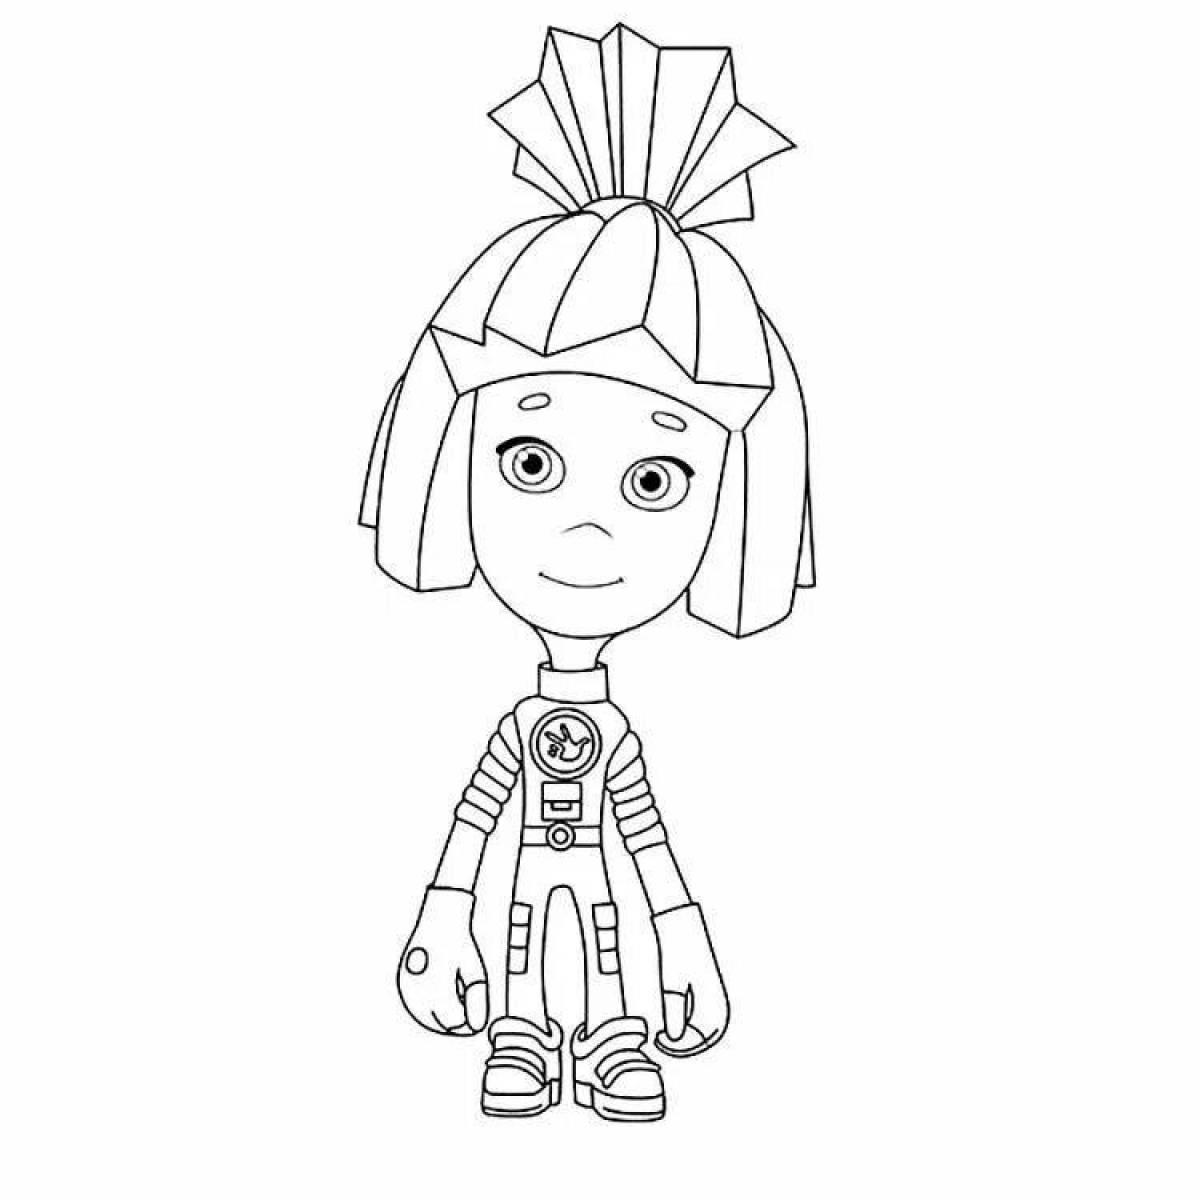 Playful reel coloring page